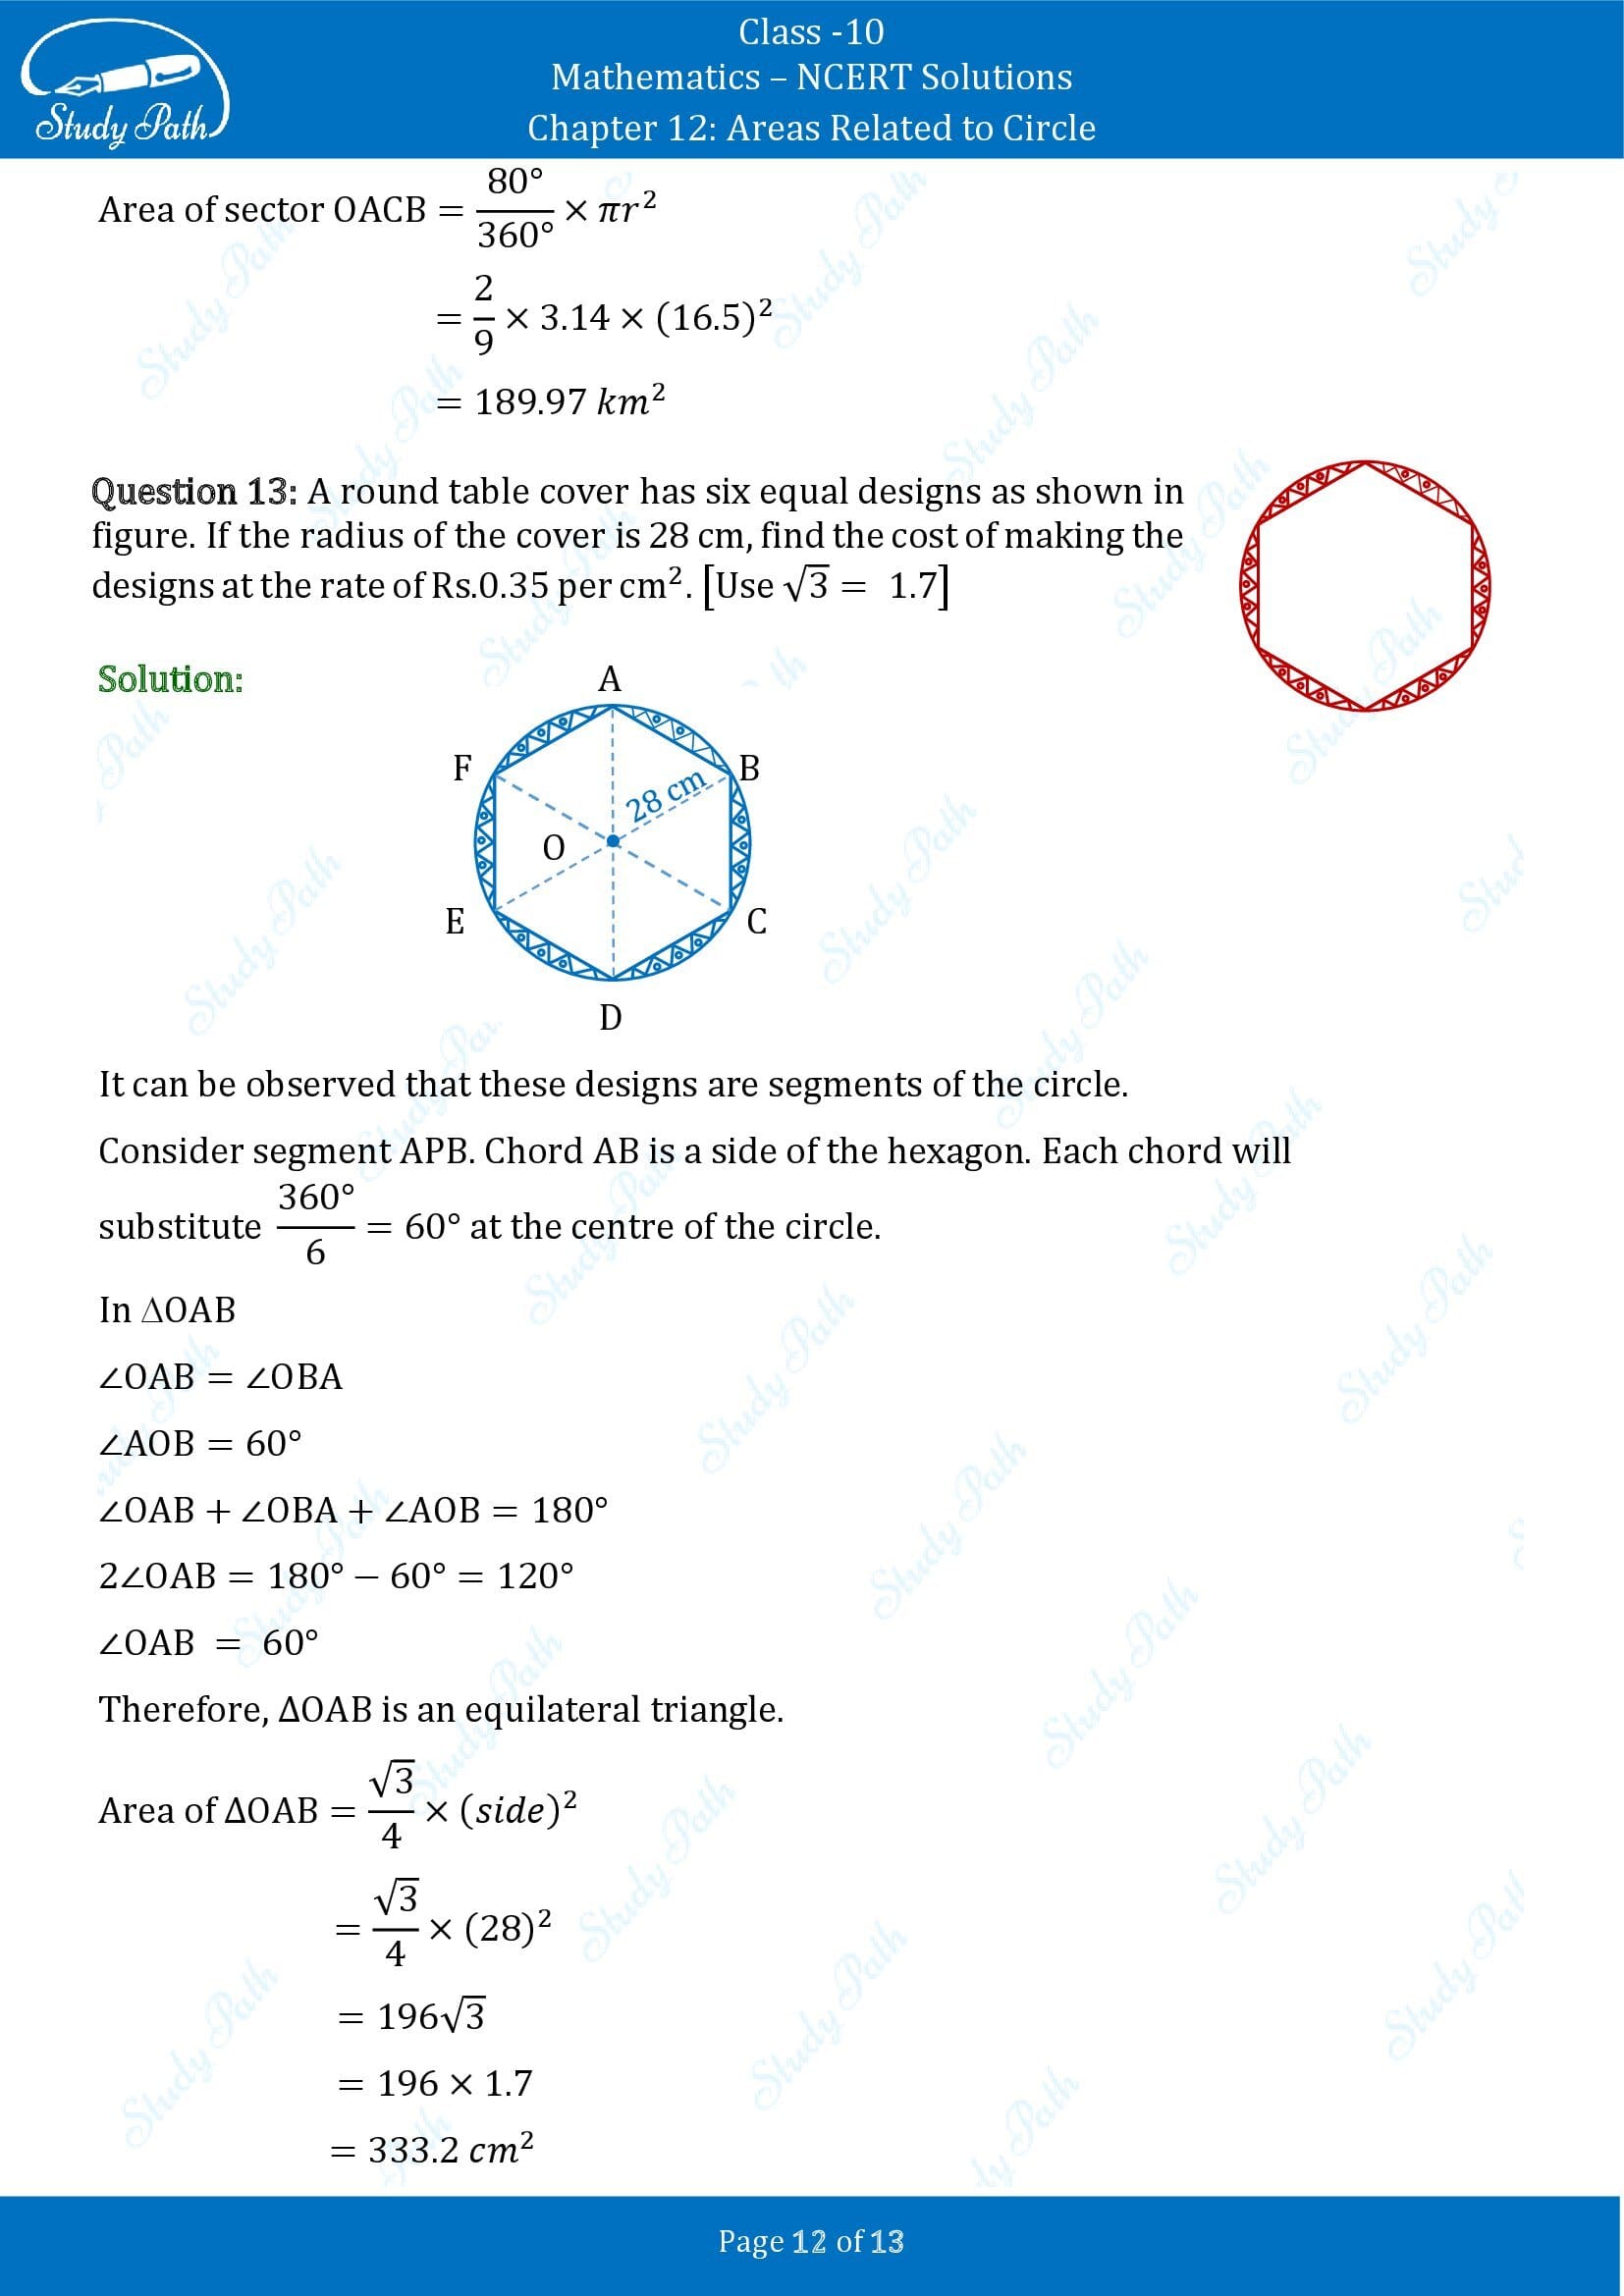 NCERT Solutions for Class 10 Maths Chapter 12 Areas Related to Circles Exercise 12.2 00012